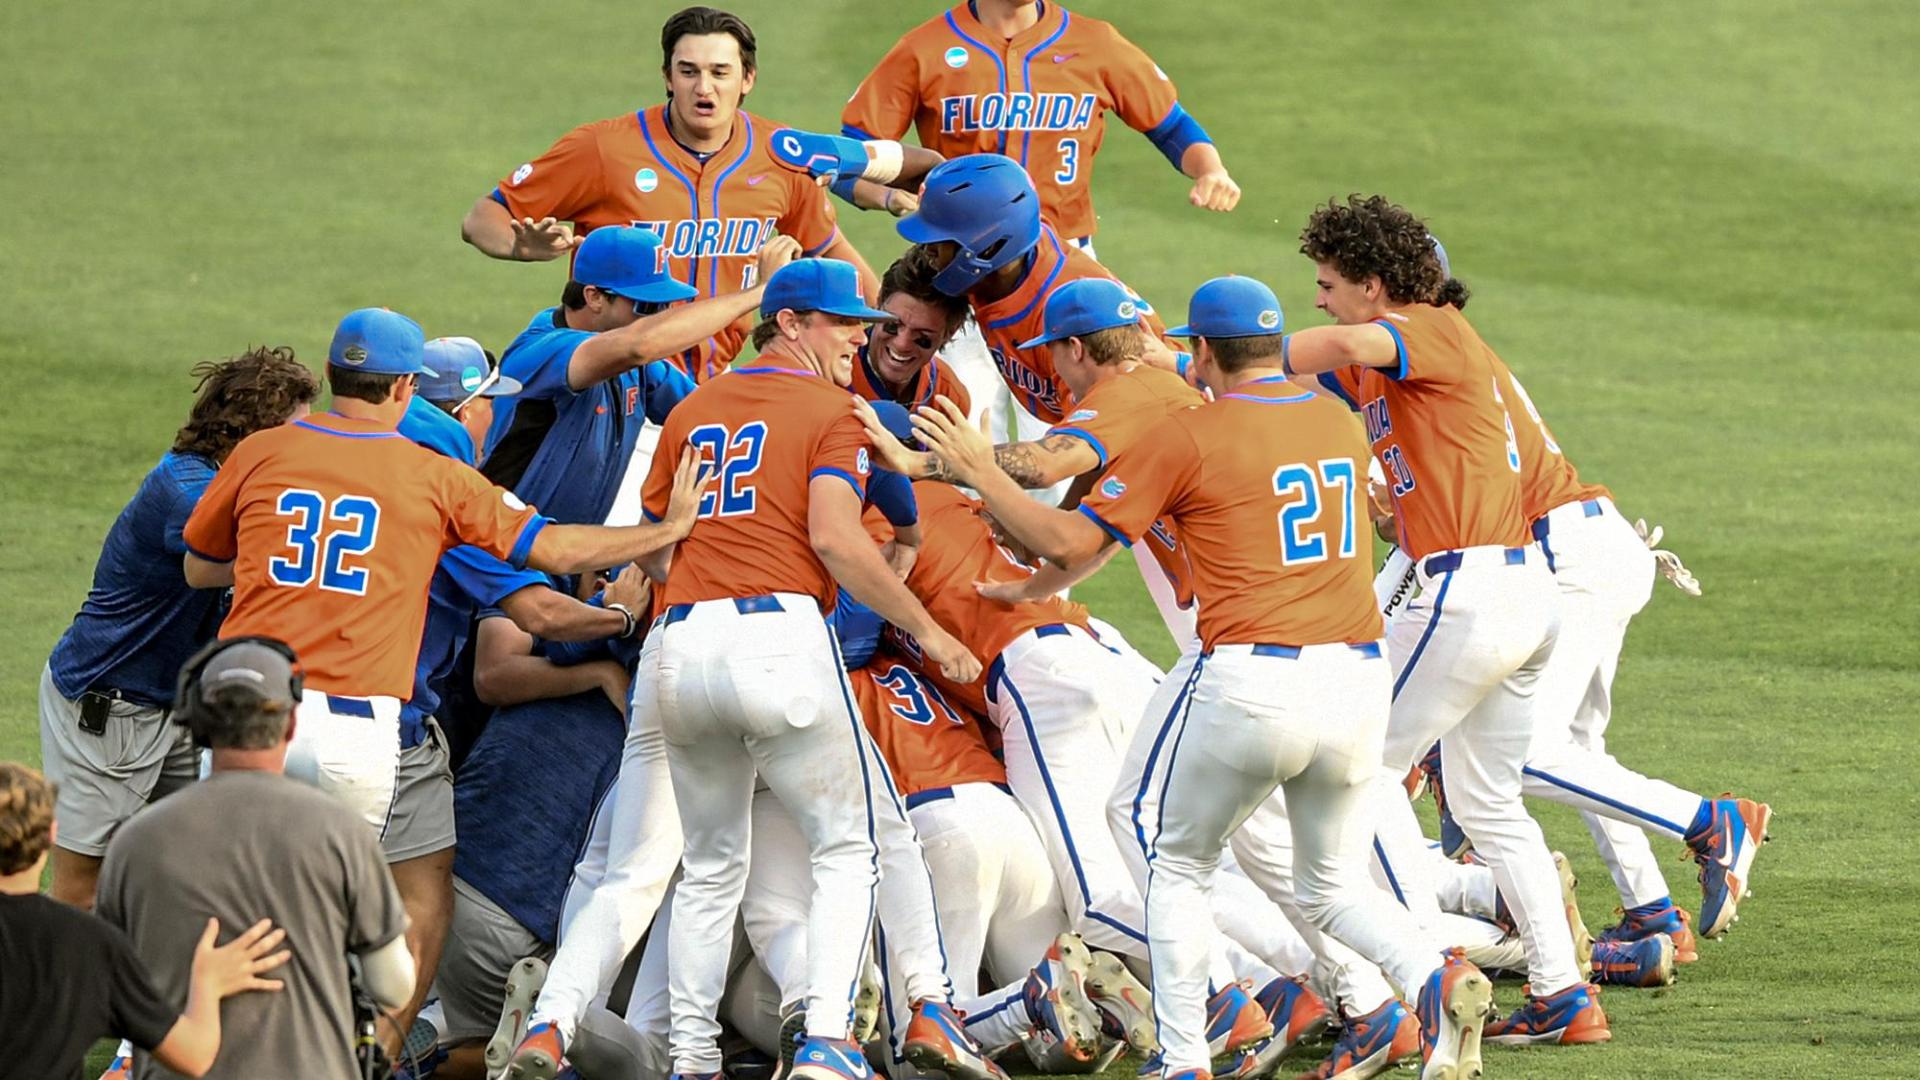 Michael Robertson walks it off for Florida in the 13th inning